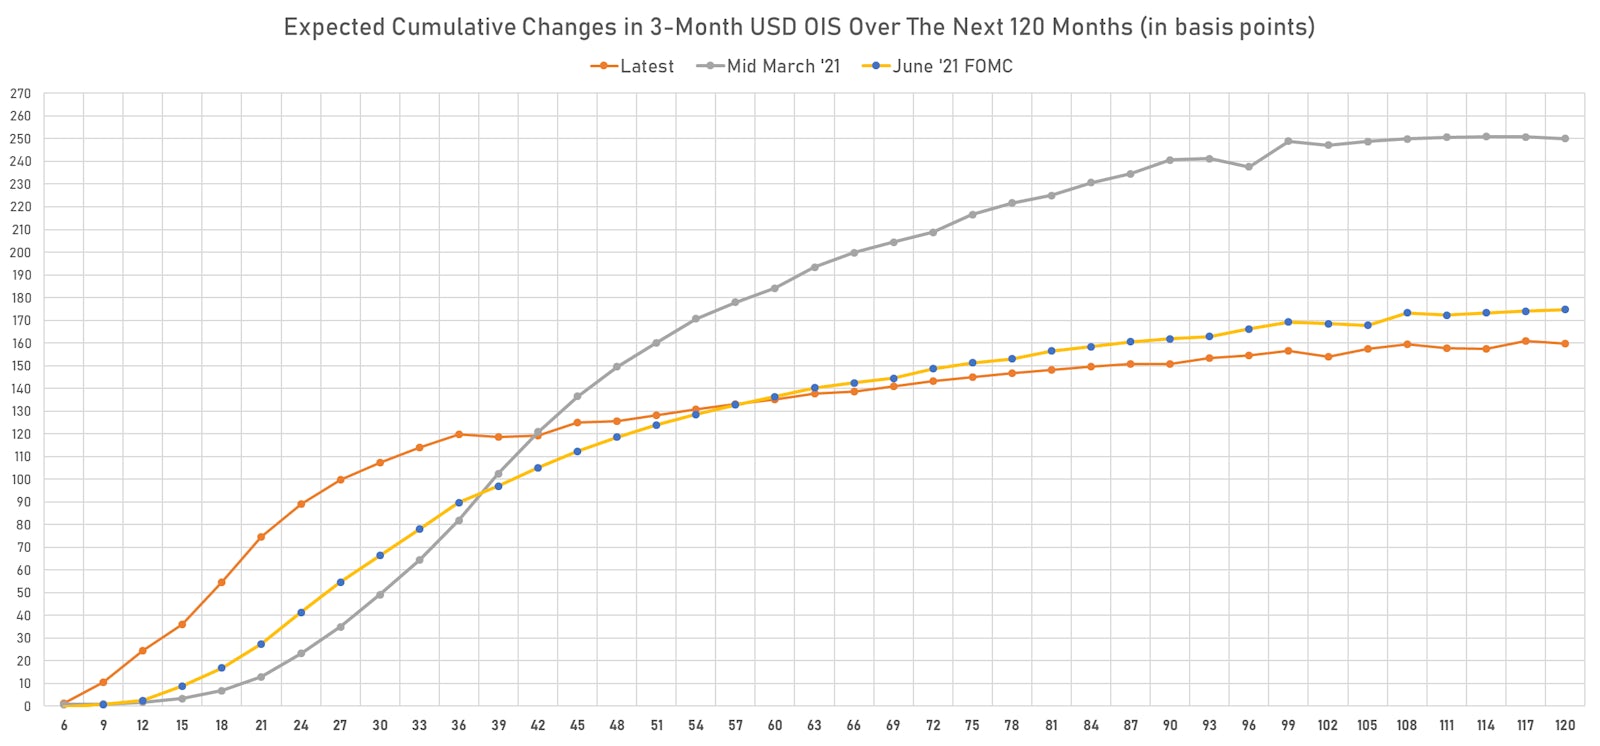 Changes In Fed Rate Hikes Priced Into The 3-Month USD OIS Forward Curve | Sources: ϕpost, Refinitiv data